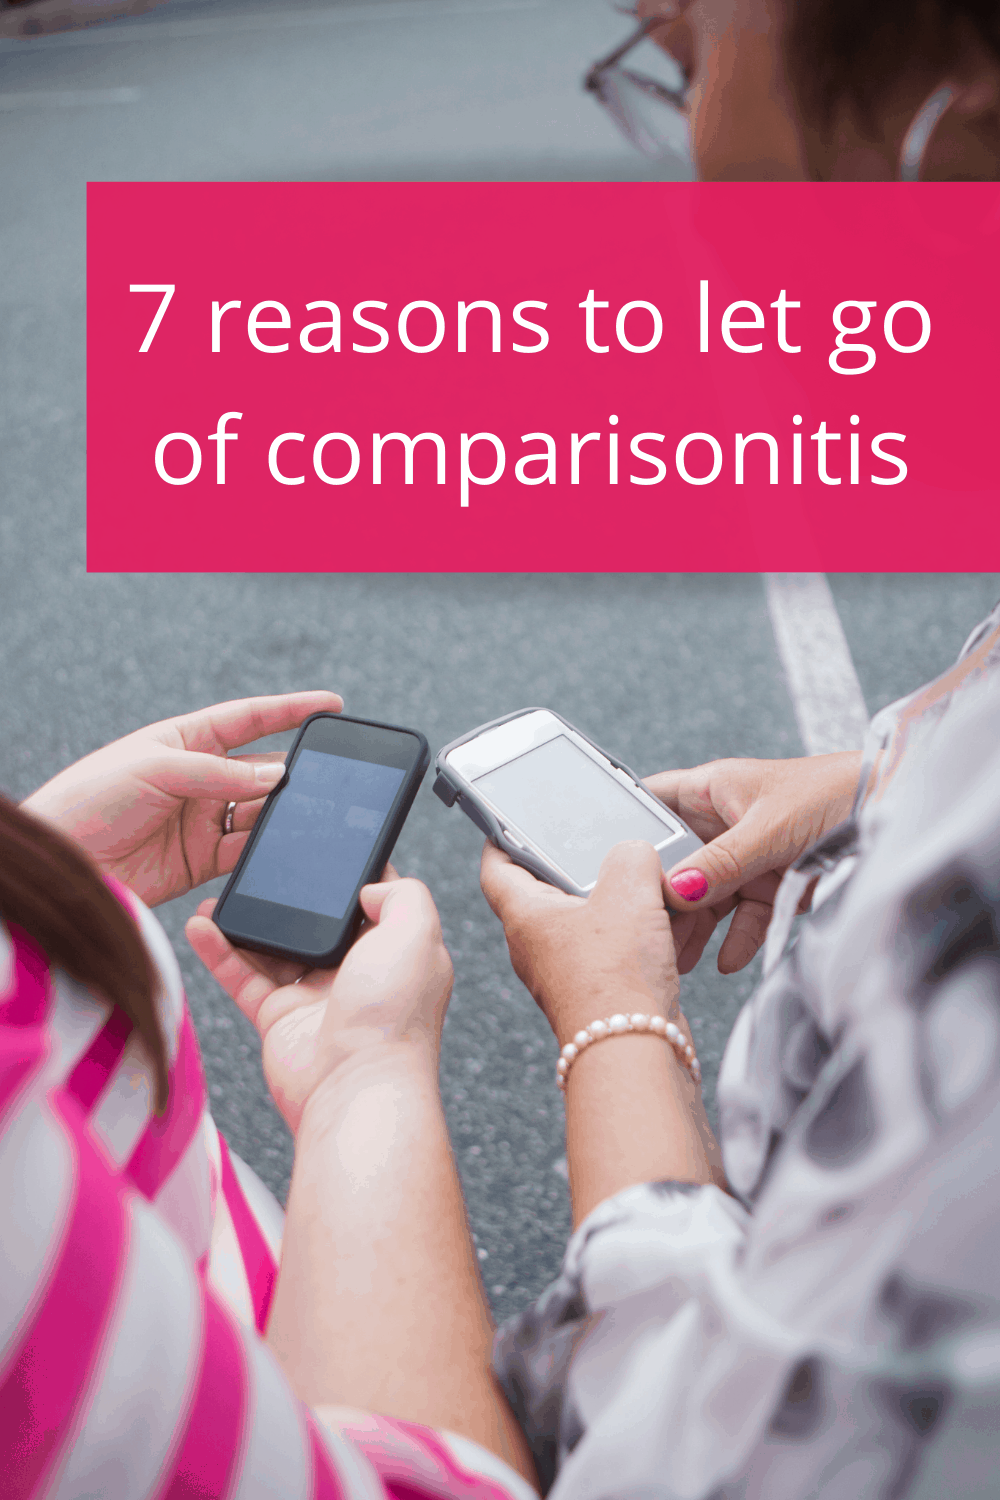 Pinterest – 7 reasons to let go of comparisonitis